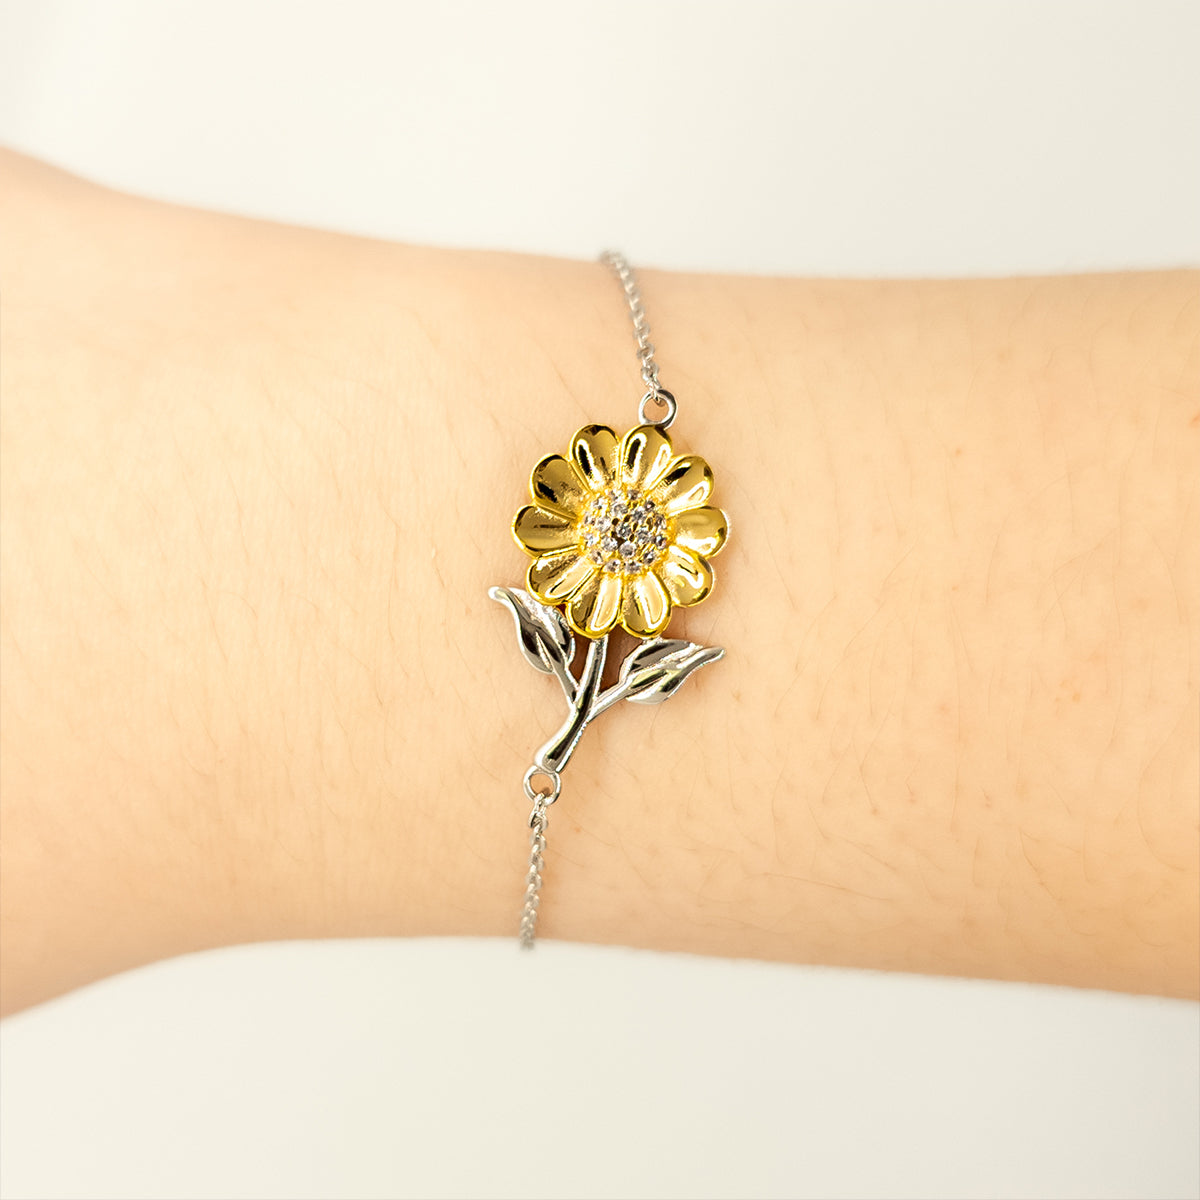 Sunflower Bracelet for Wife - Engraved Love and Confidence, Perfect Gift for Christmas, Birthday, Easter - 1 John 4:18 Inspirational Jewelry for Wife